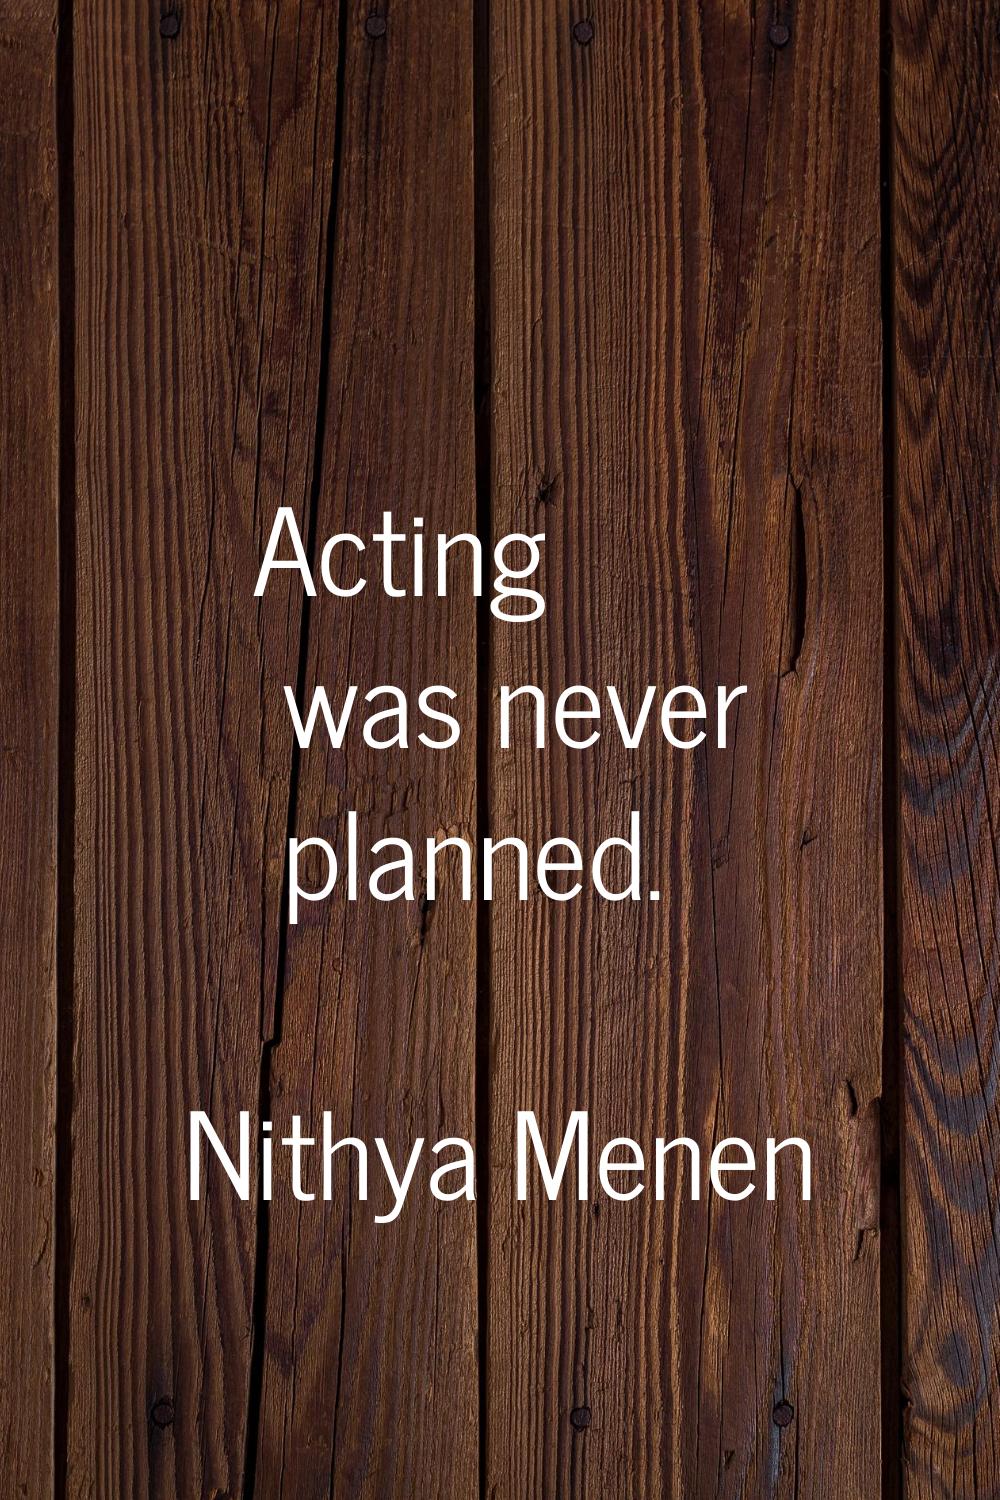 Acting was never planned.